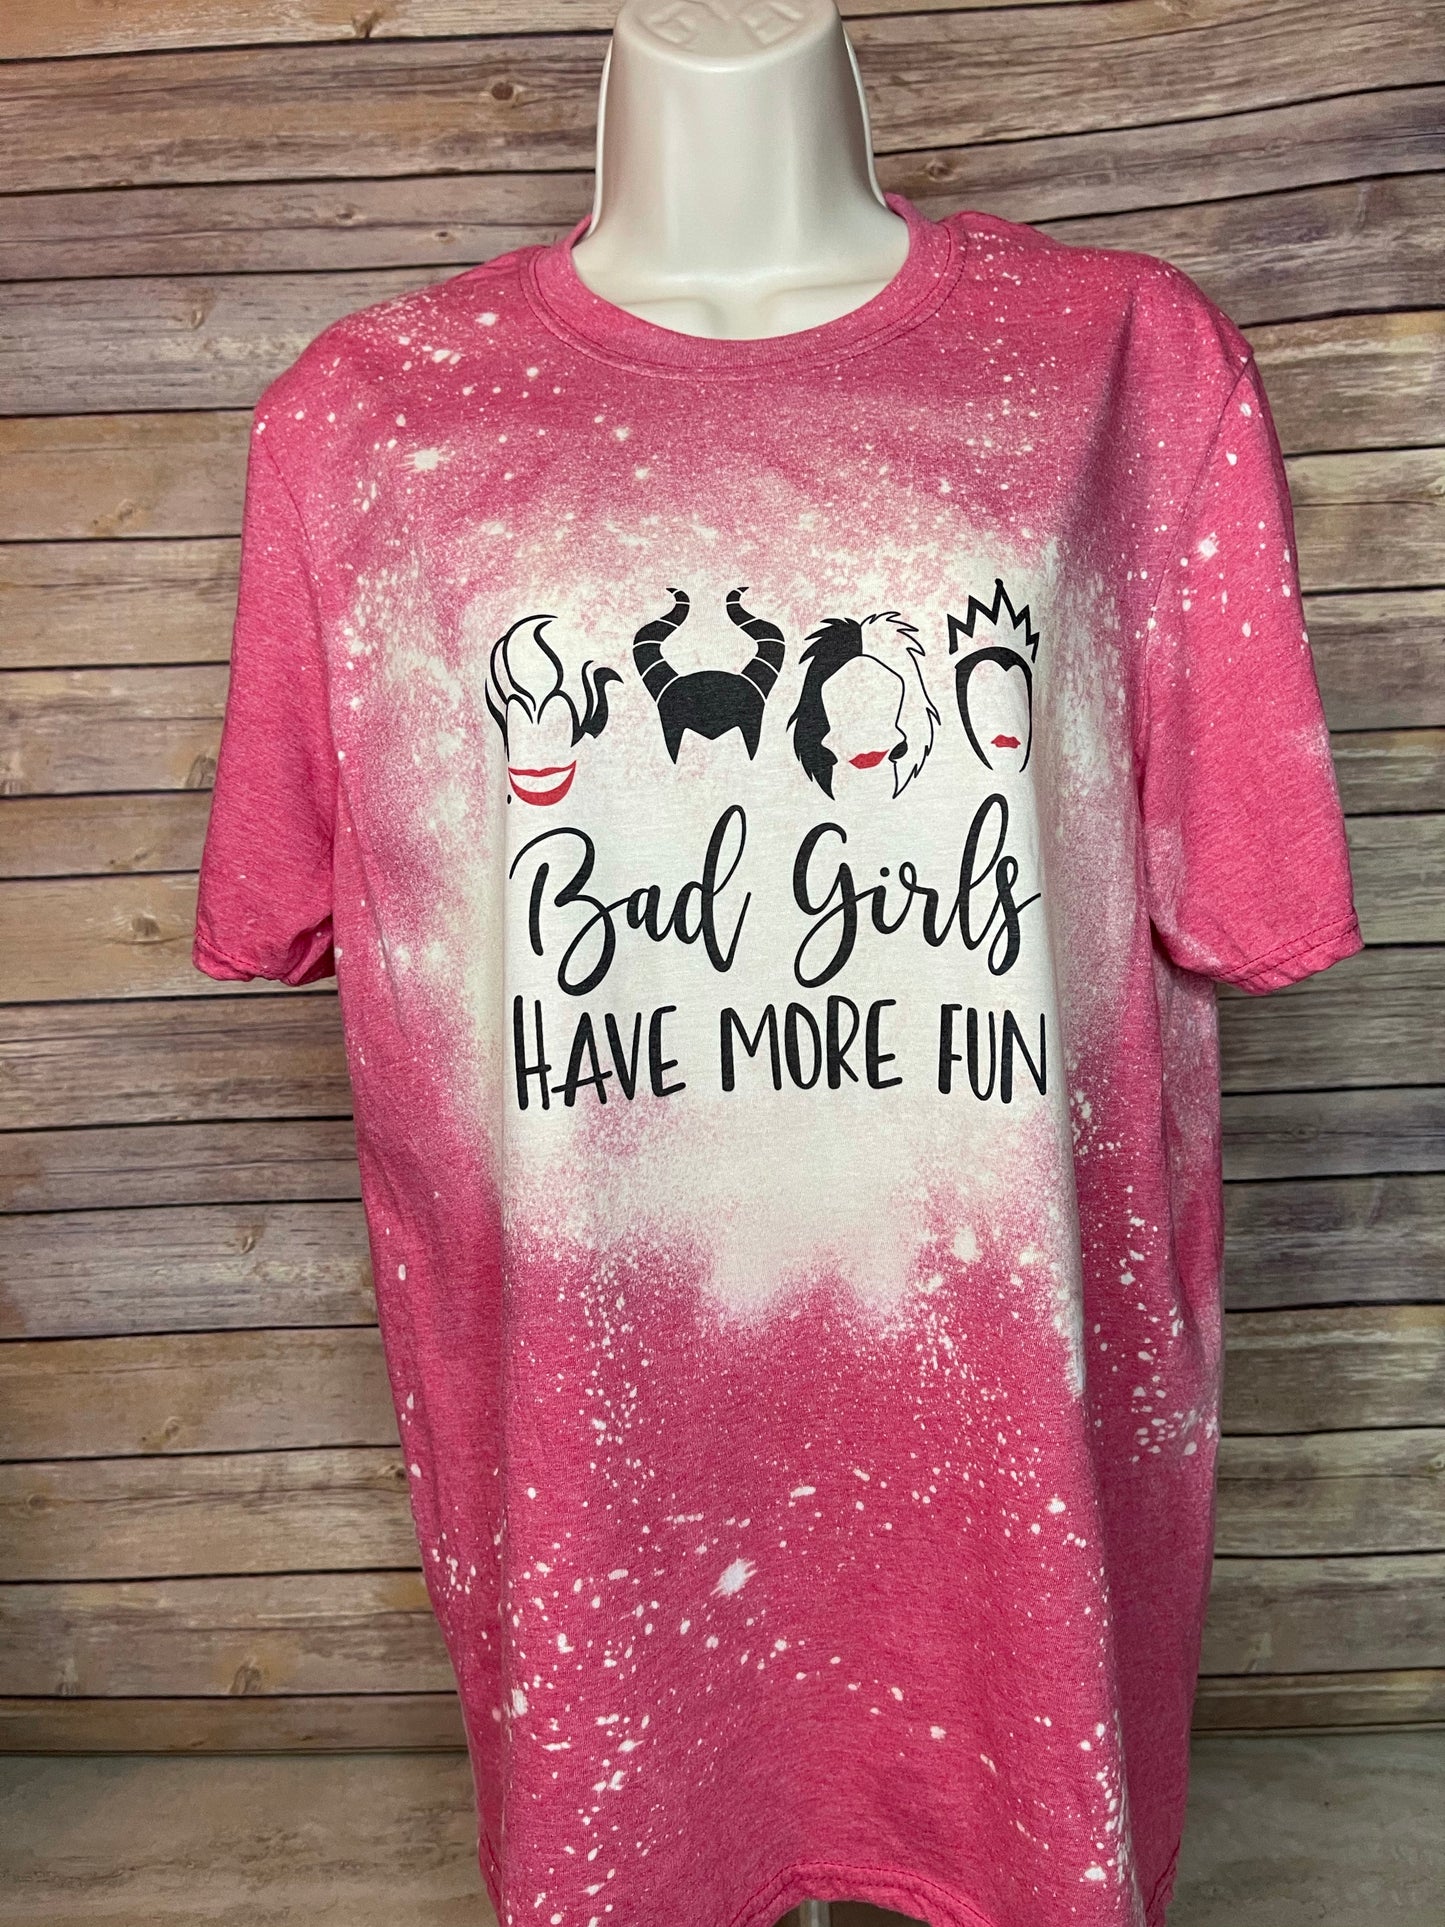 Bad girls have More fun Bleached Tee